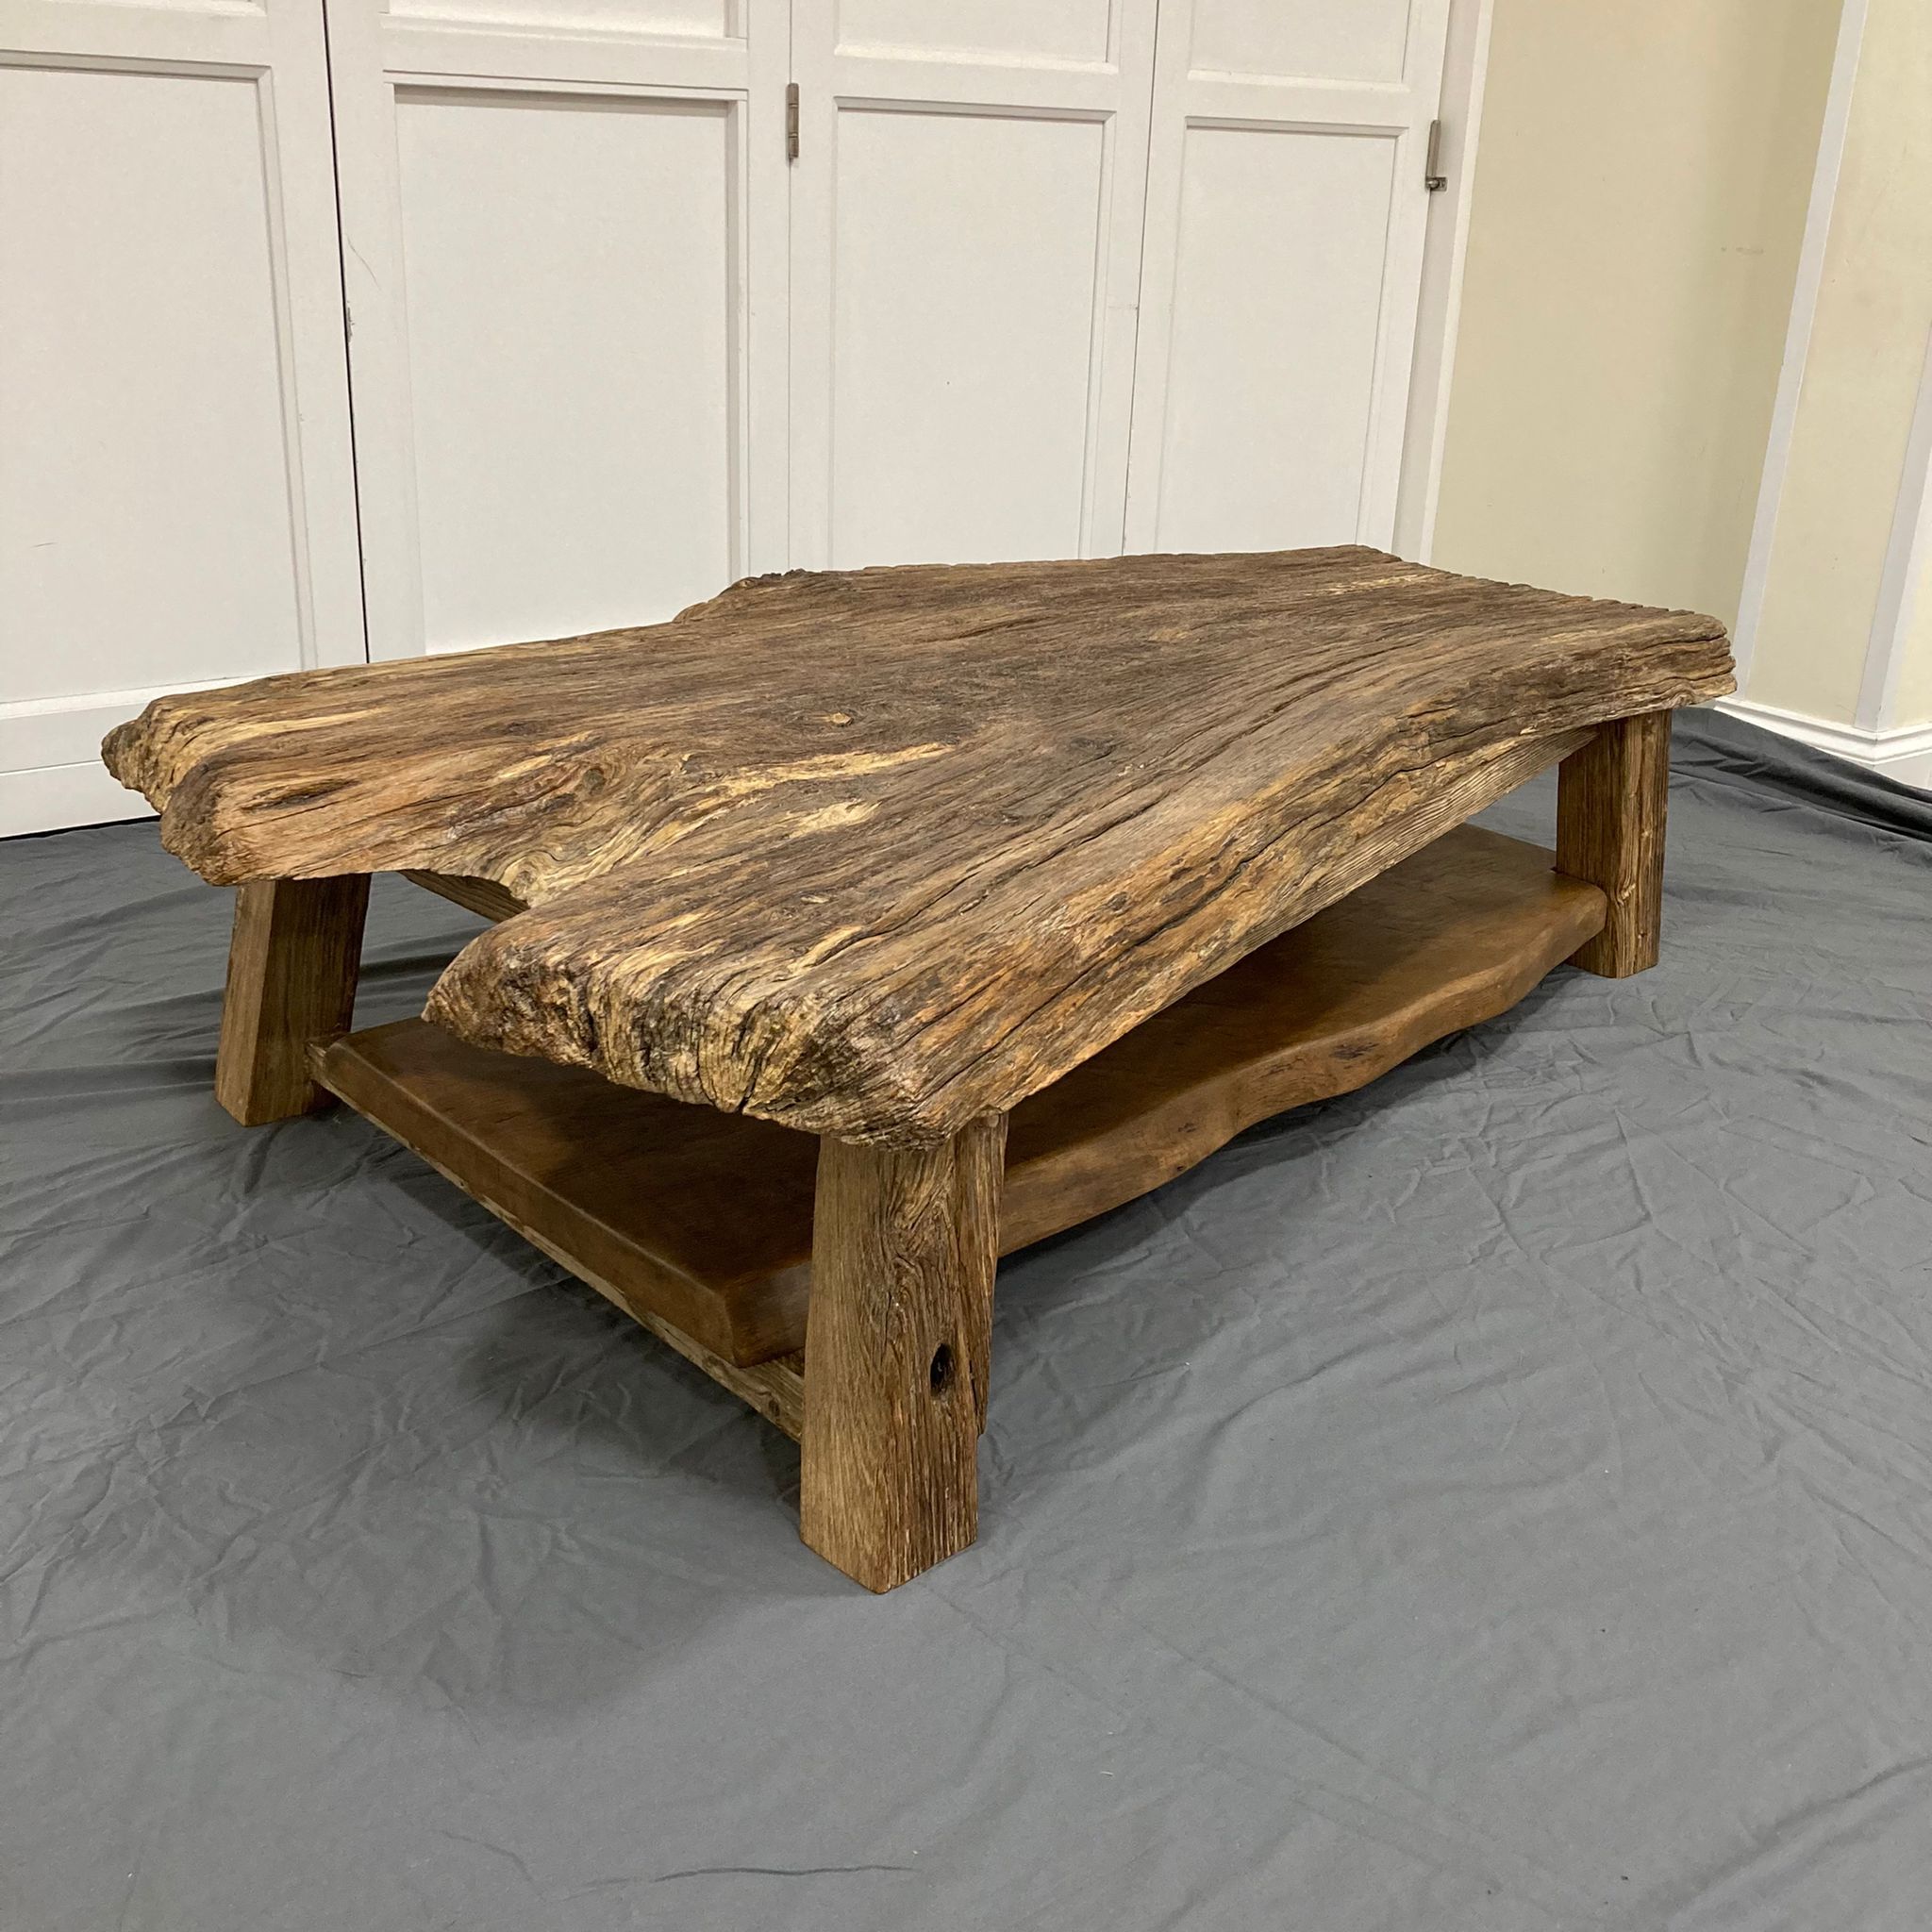 Rustic Coffee Tables With Popular Rustic Coffee Table – Blackstone Chalk (View 6 of 10)